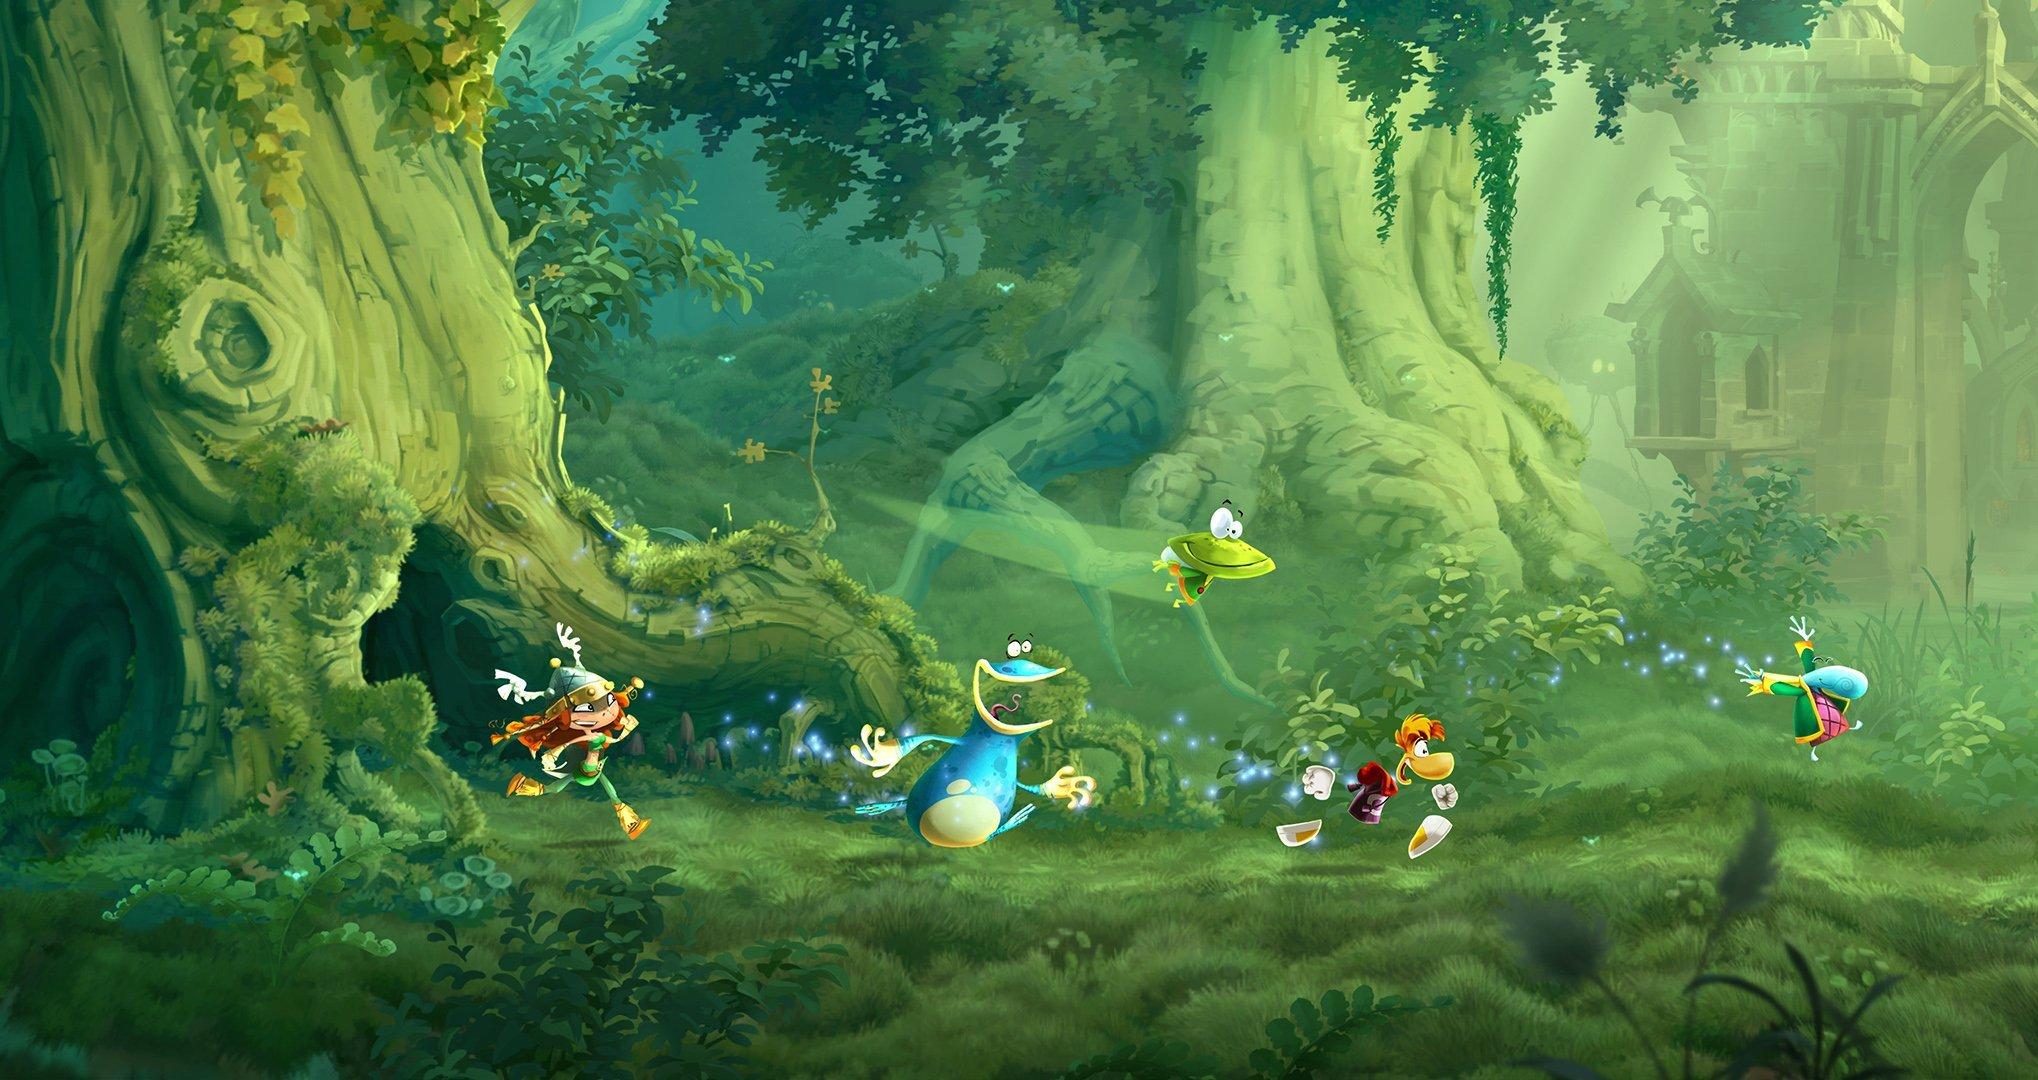 Rayman - Rayman Legends Definitive Edition is now available on Nintendo  Switch!